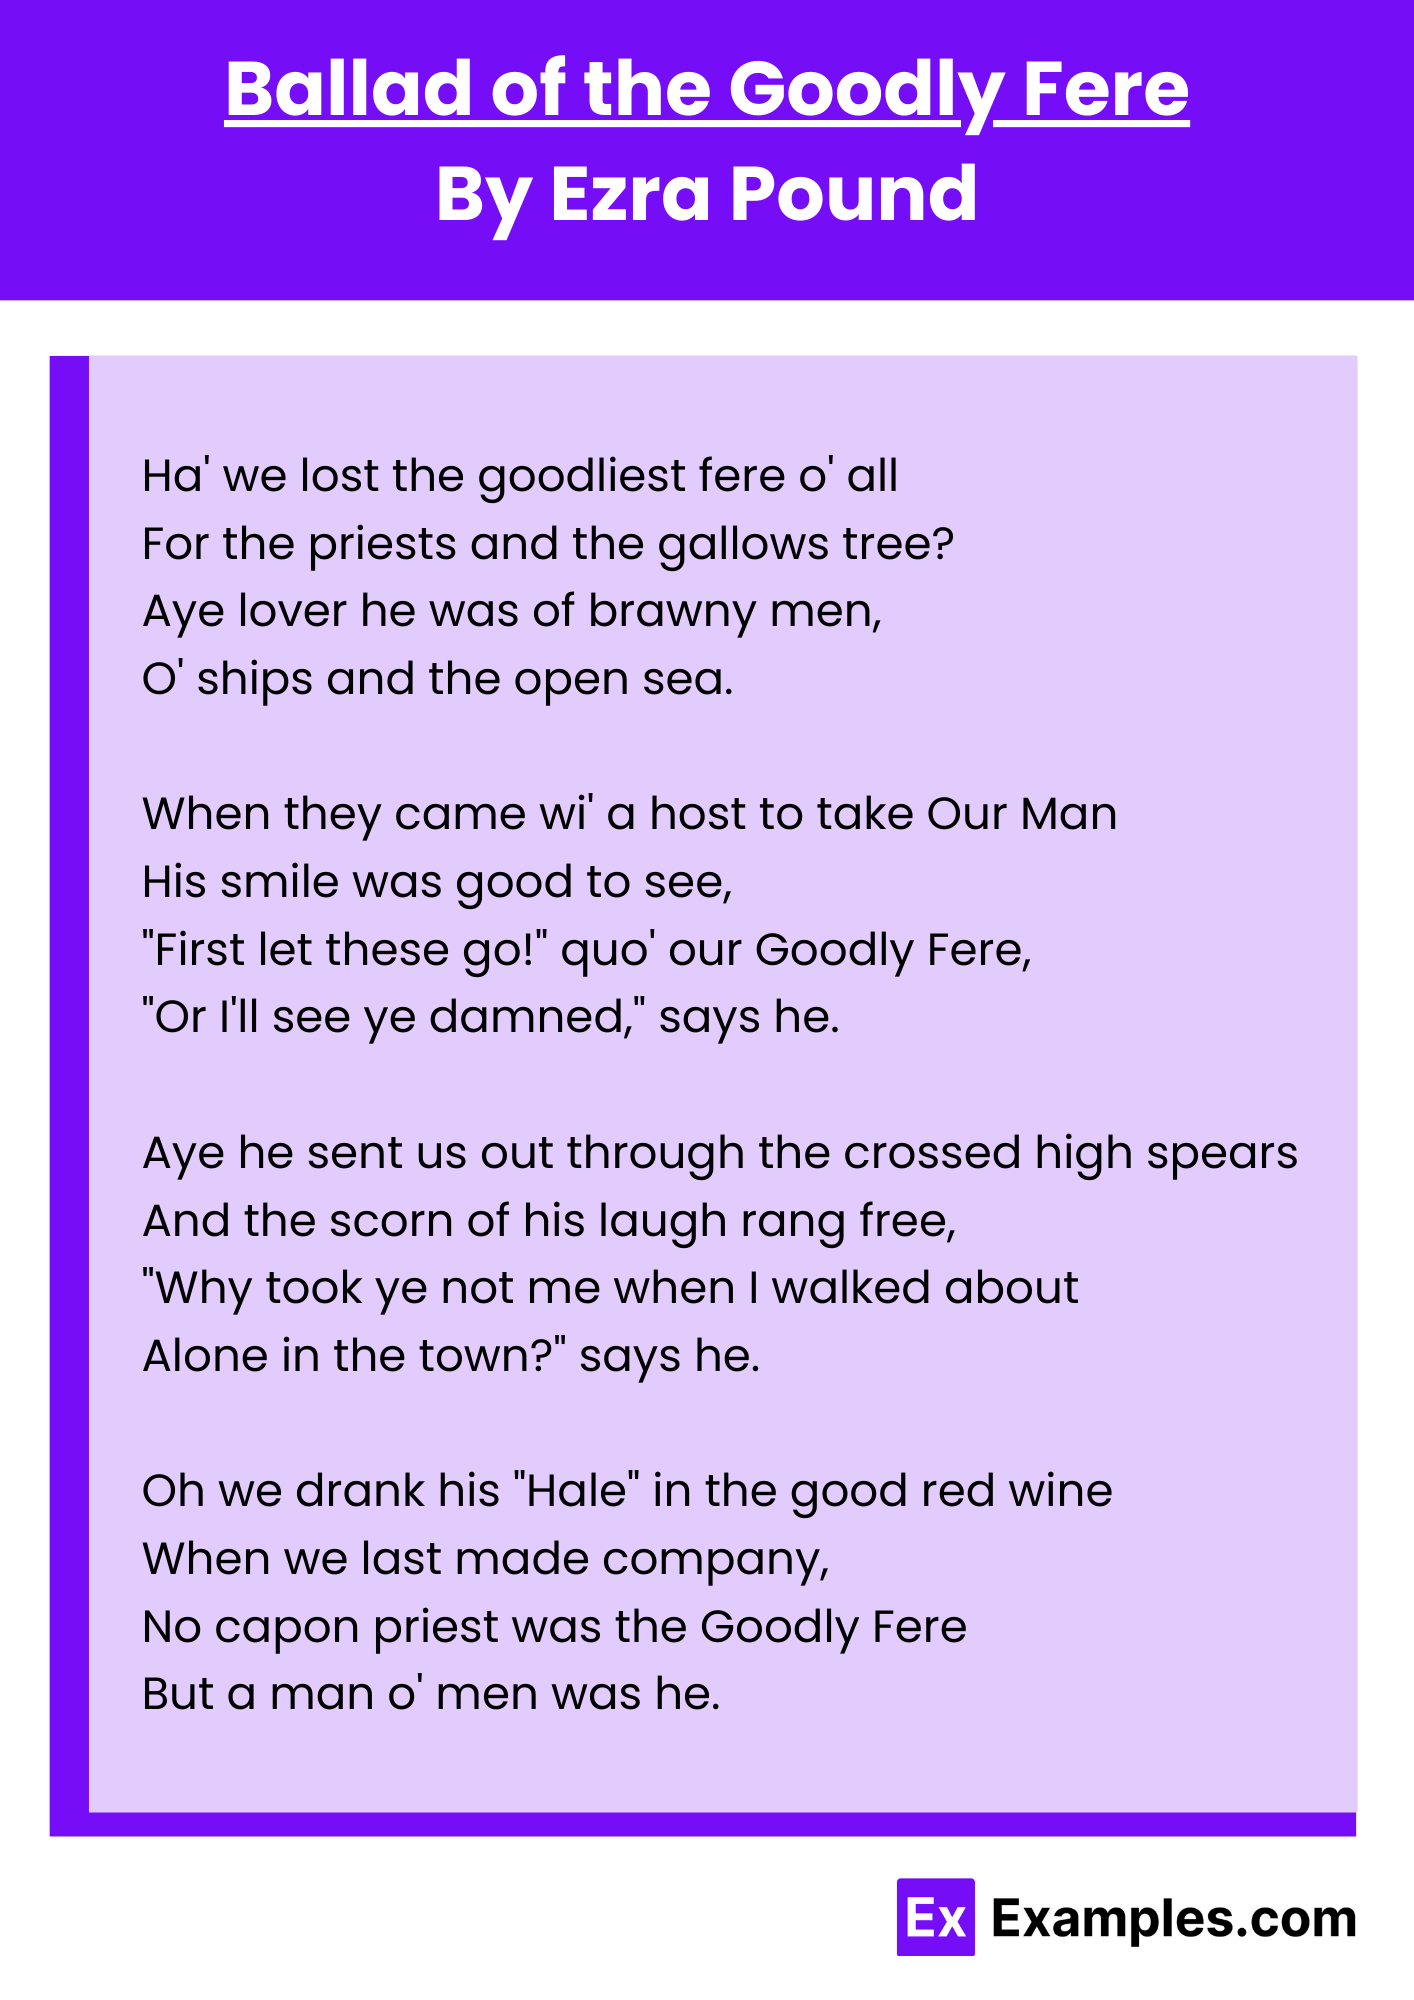 Ballad of the Goodly Fere By Ezra Pound